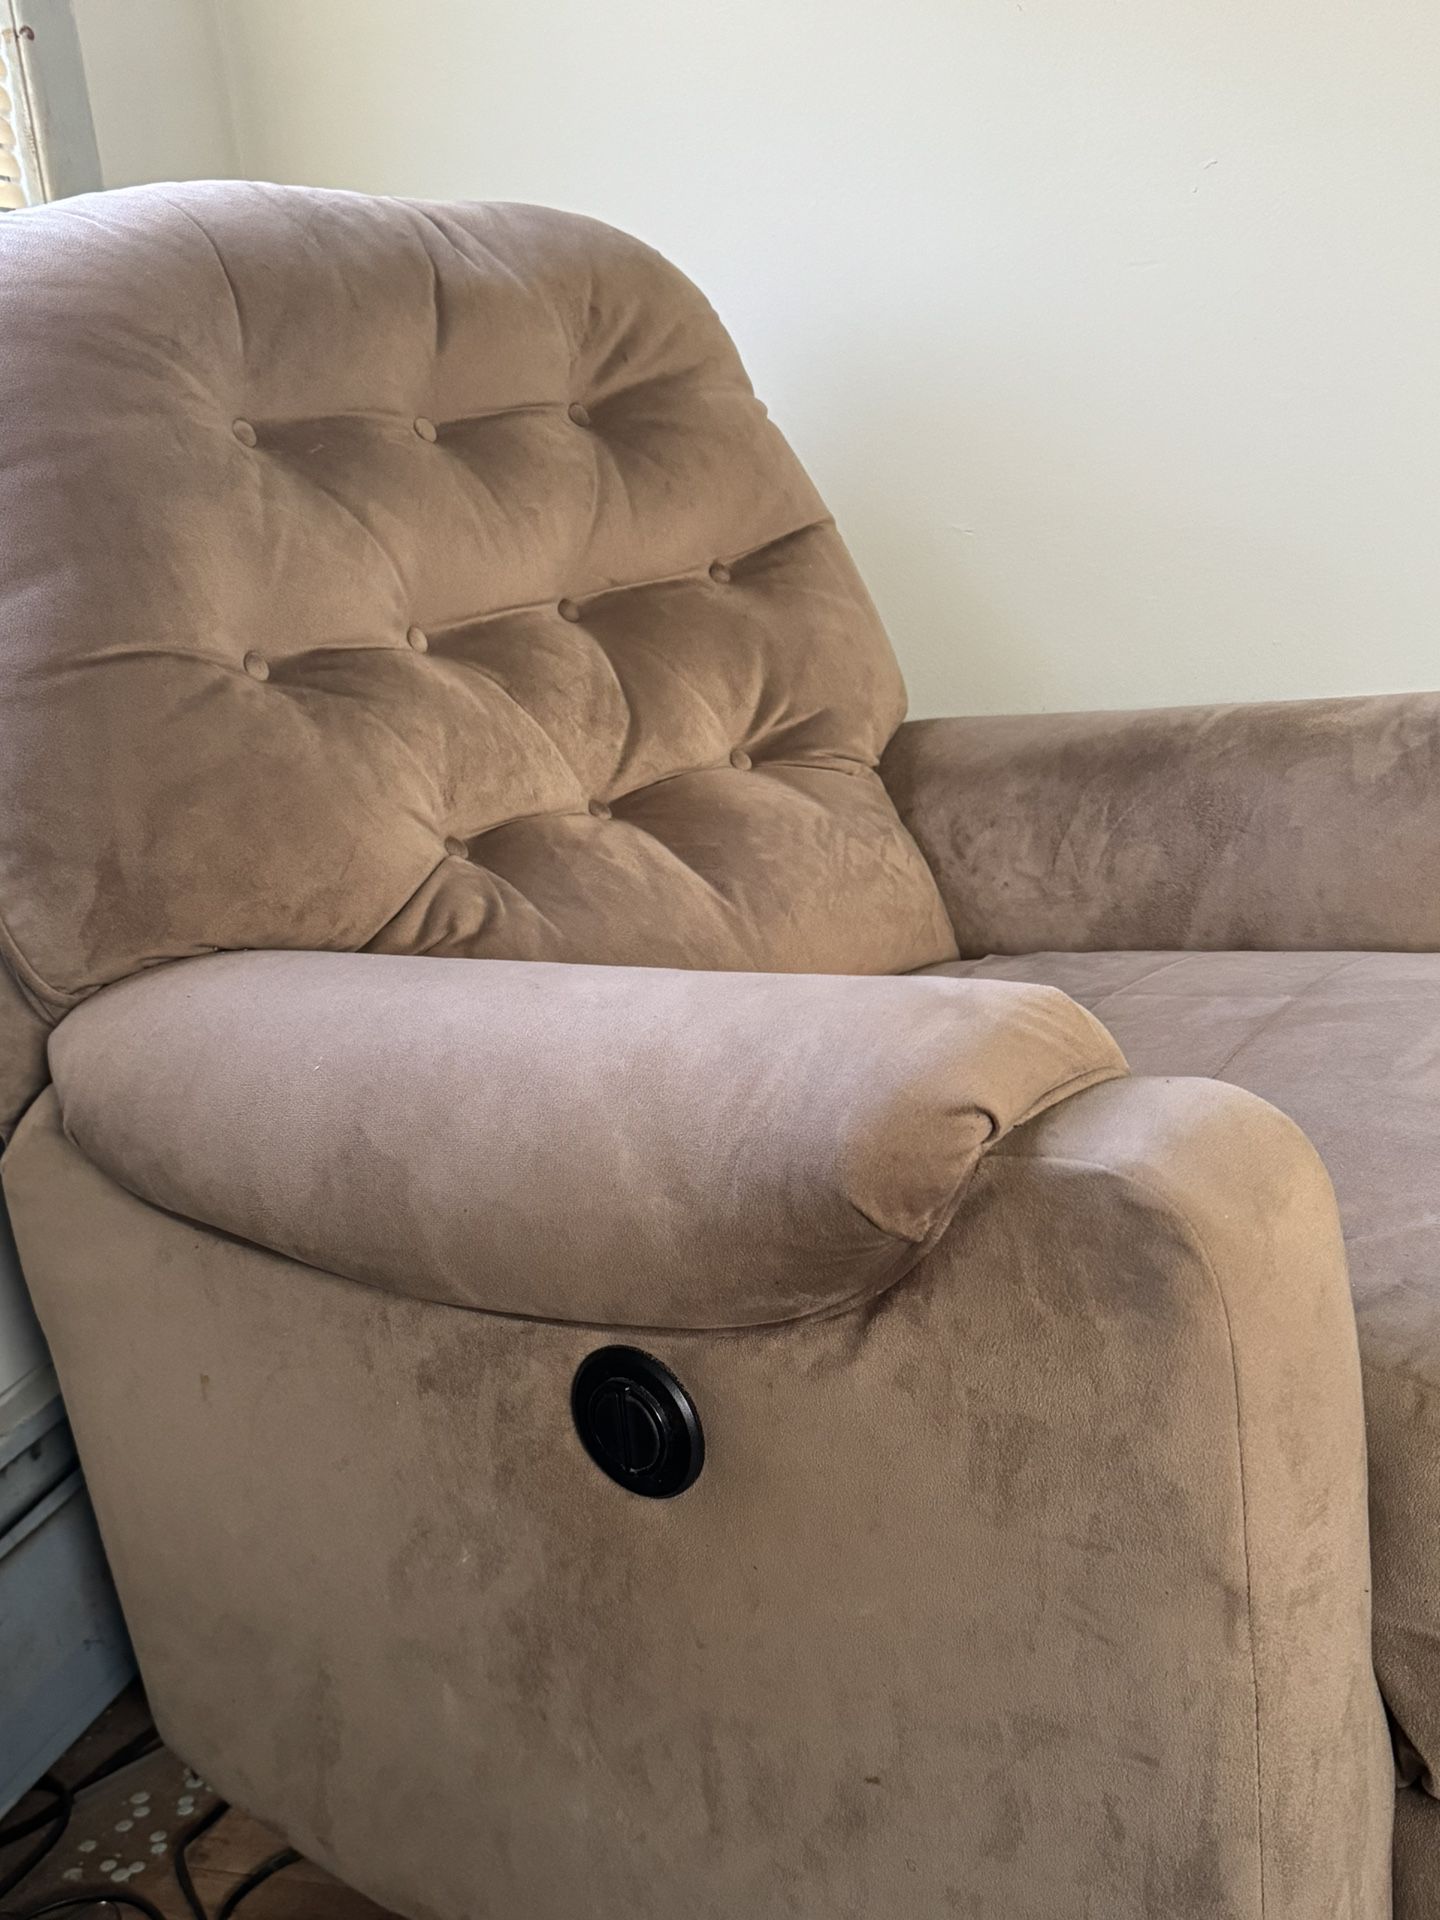 Motorized Reclining Chair Like New Condition 